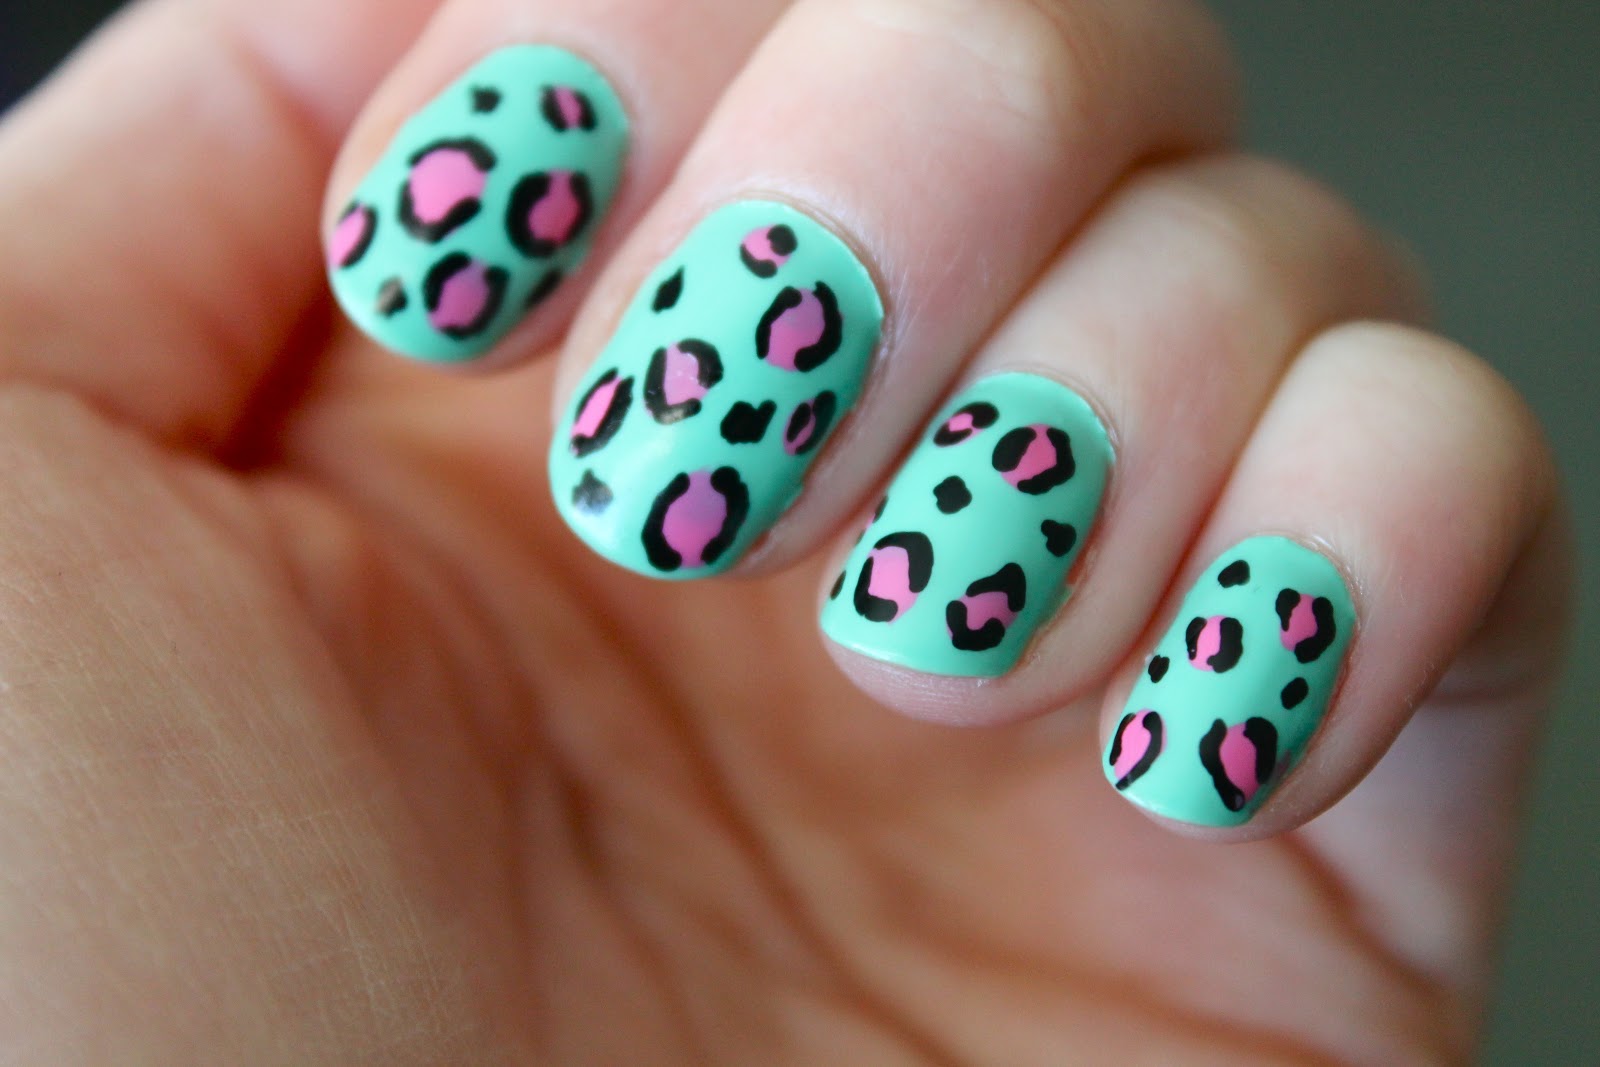 9. Step by Step Guide to Creating Cute Animal Nail Designs - wide 9